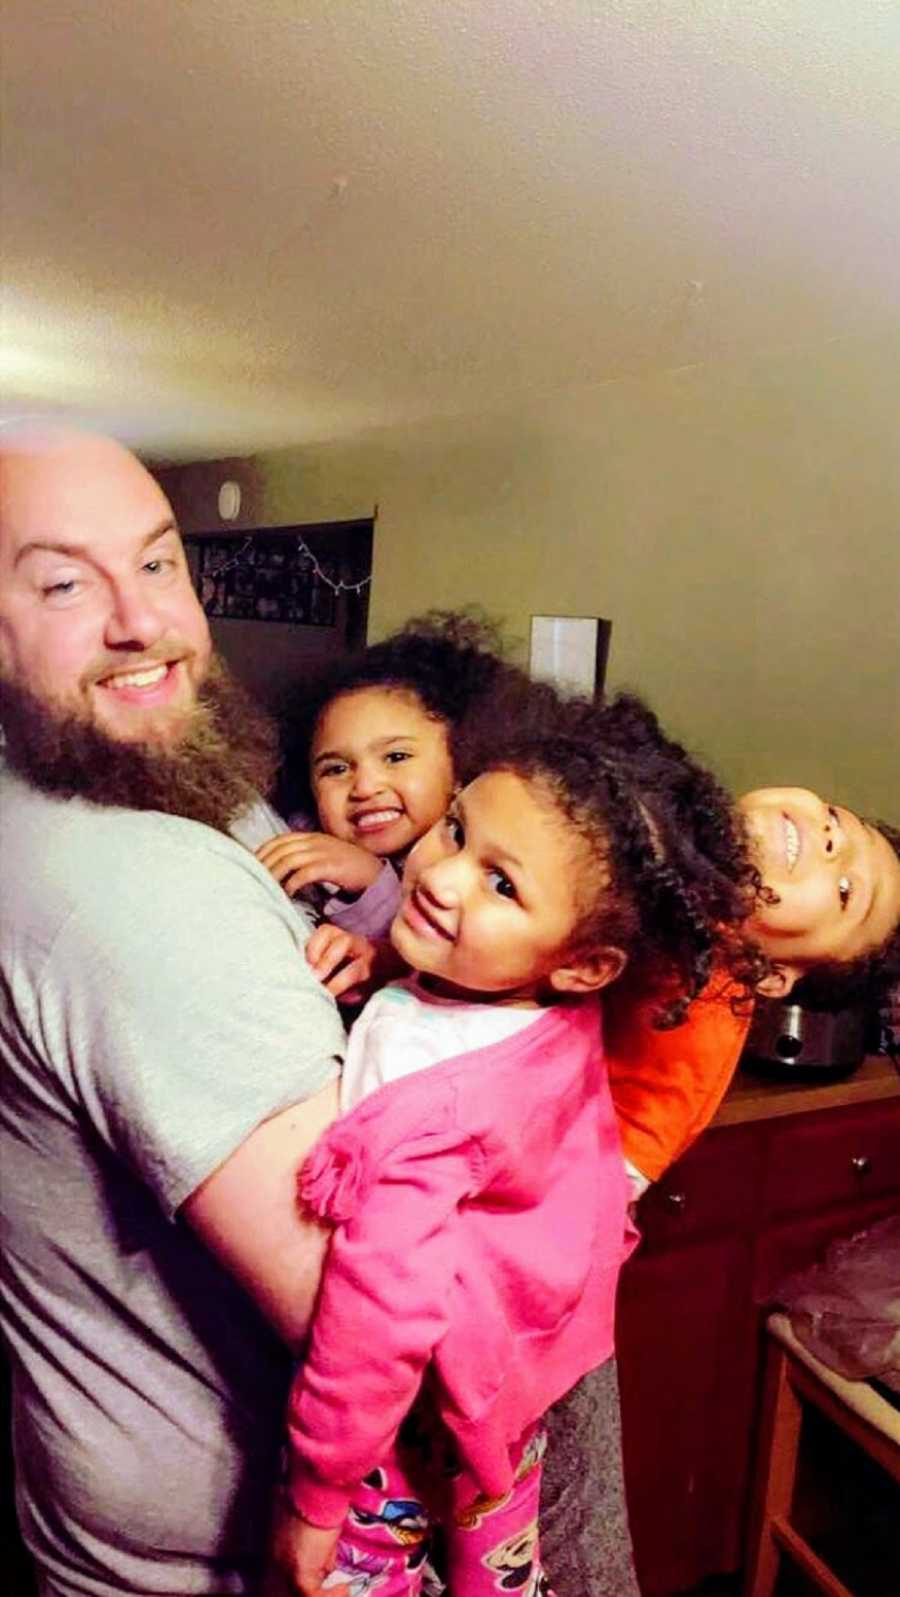 ‘I like you around my mommy because you don’t yell at her.’ The judge thanked him for stepping up. I couldn’t hold back my tears.’: Woman marries ‘fairy tale’ man after abusive relationship, new husband adopts her 3 kids 5